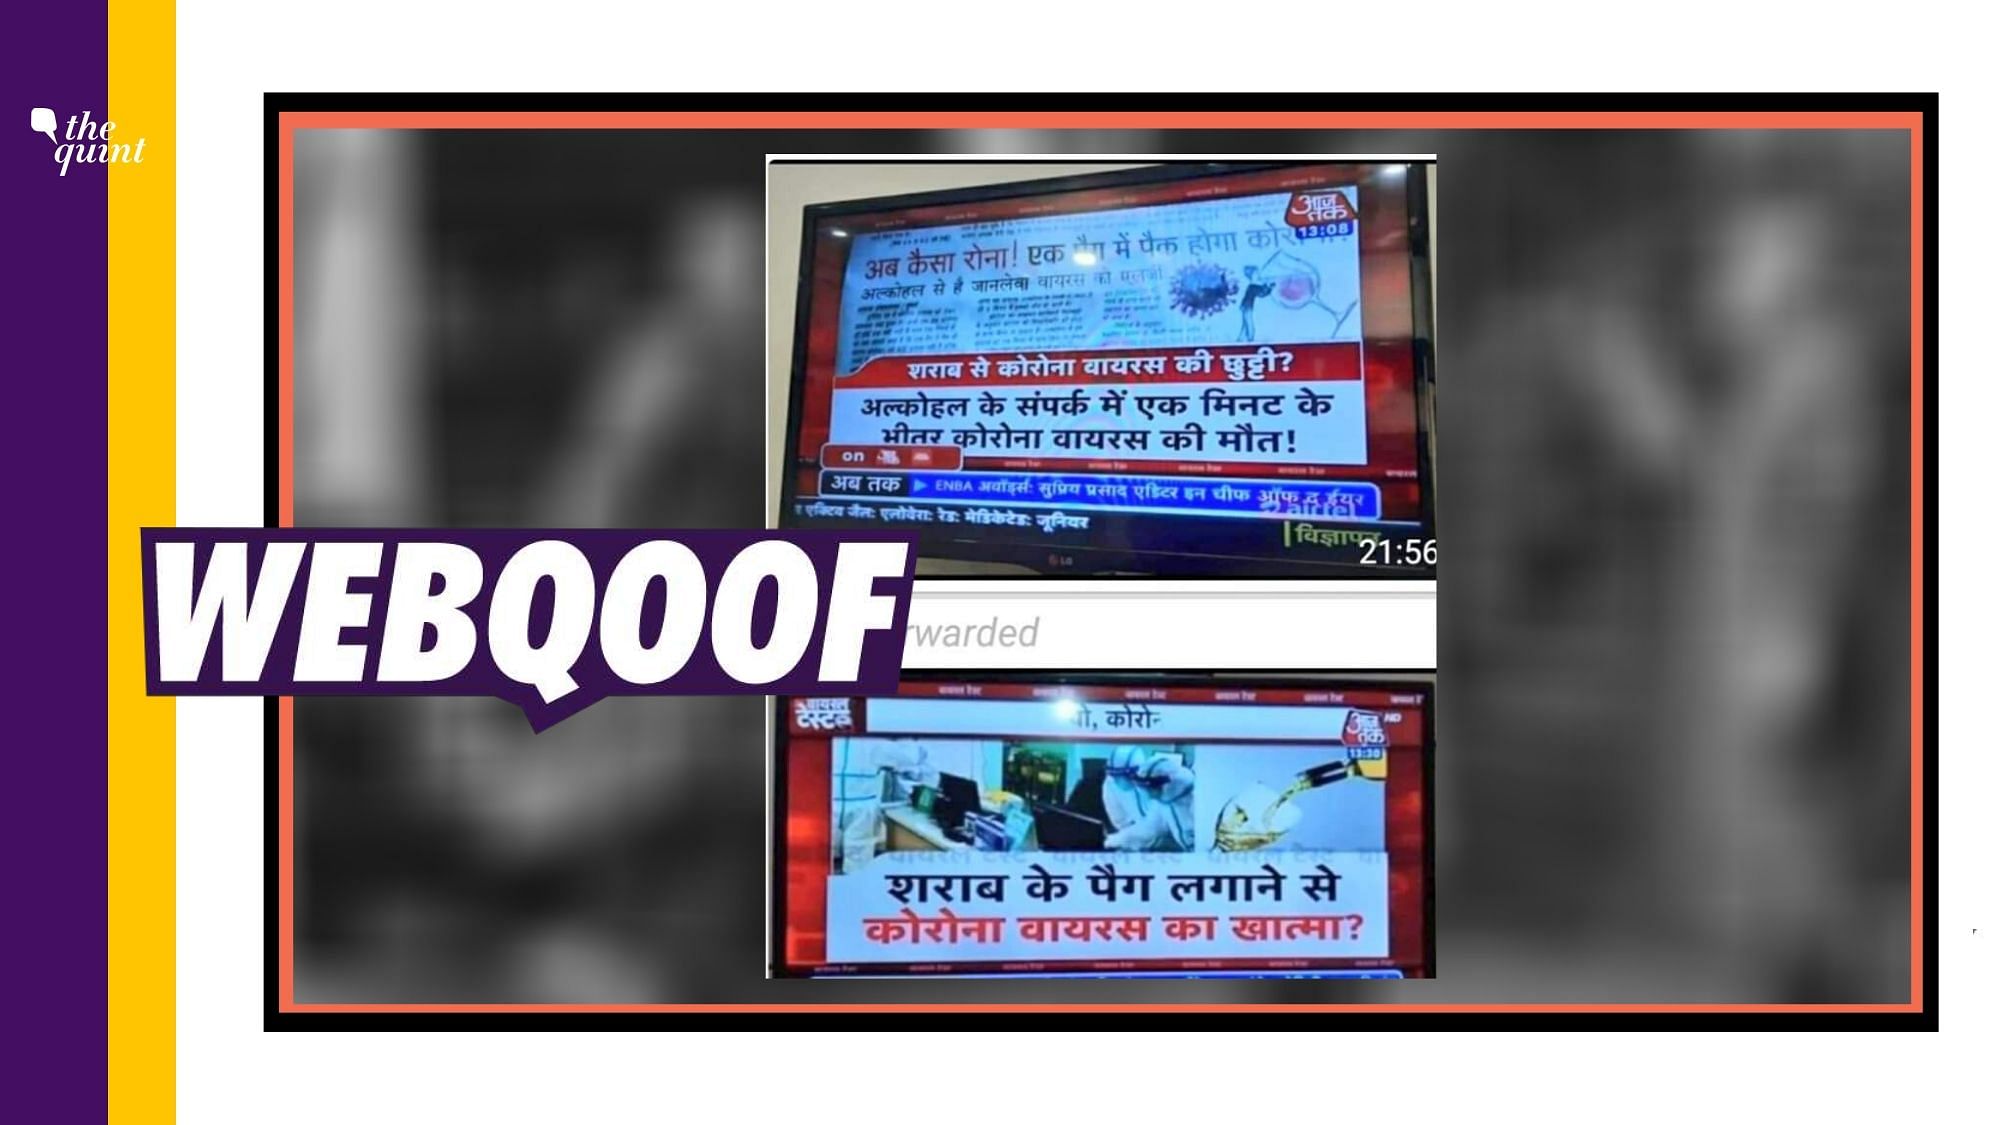 Many users on social media are sharing screenshots of a bulletin of Hindi news channel AajTak with a claim that alcohol has the potential to “destroy the virus within a second of coming in contact with it.”